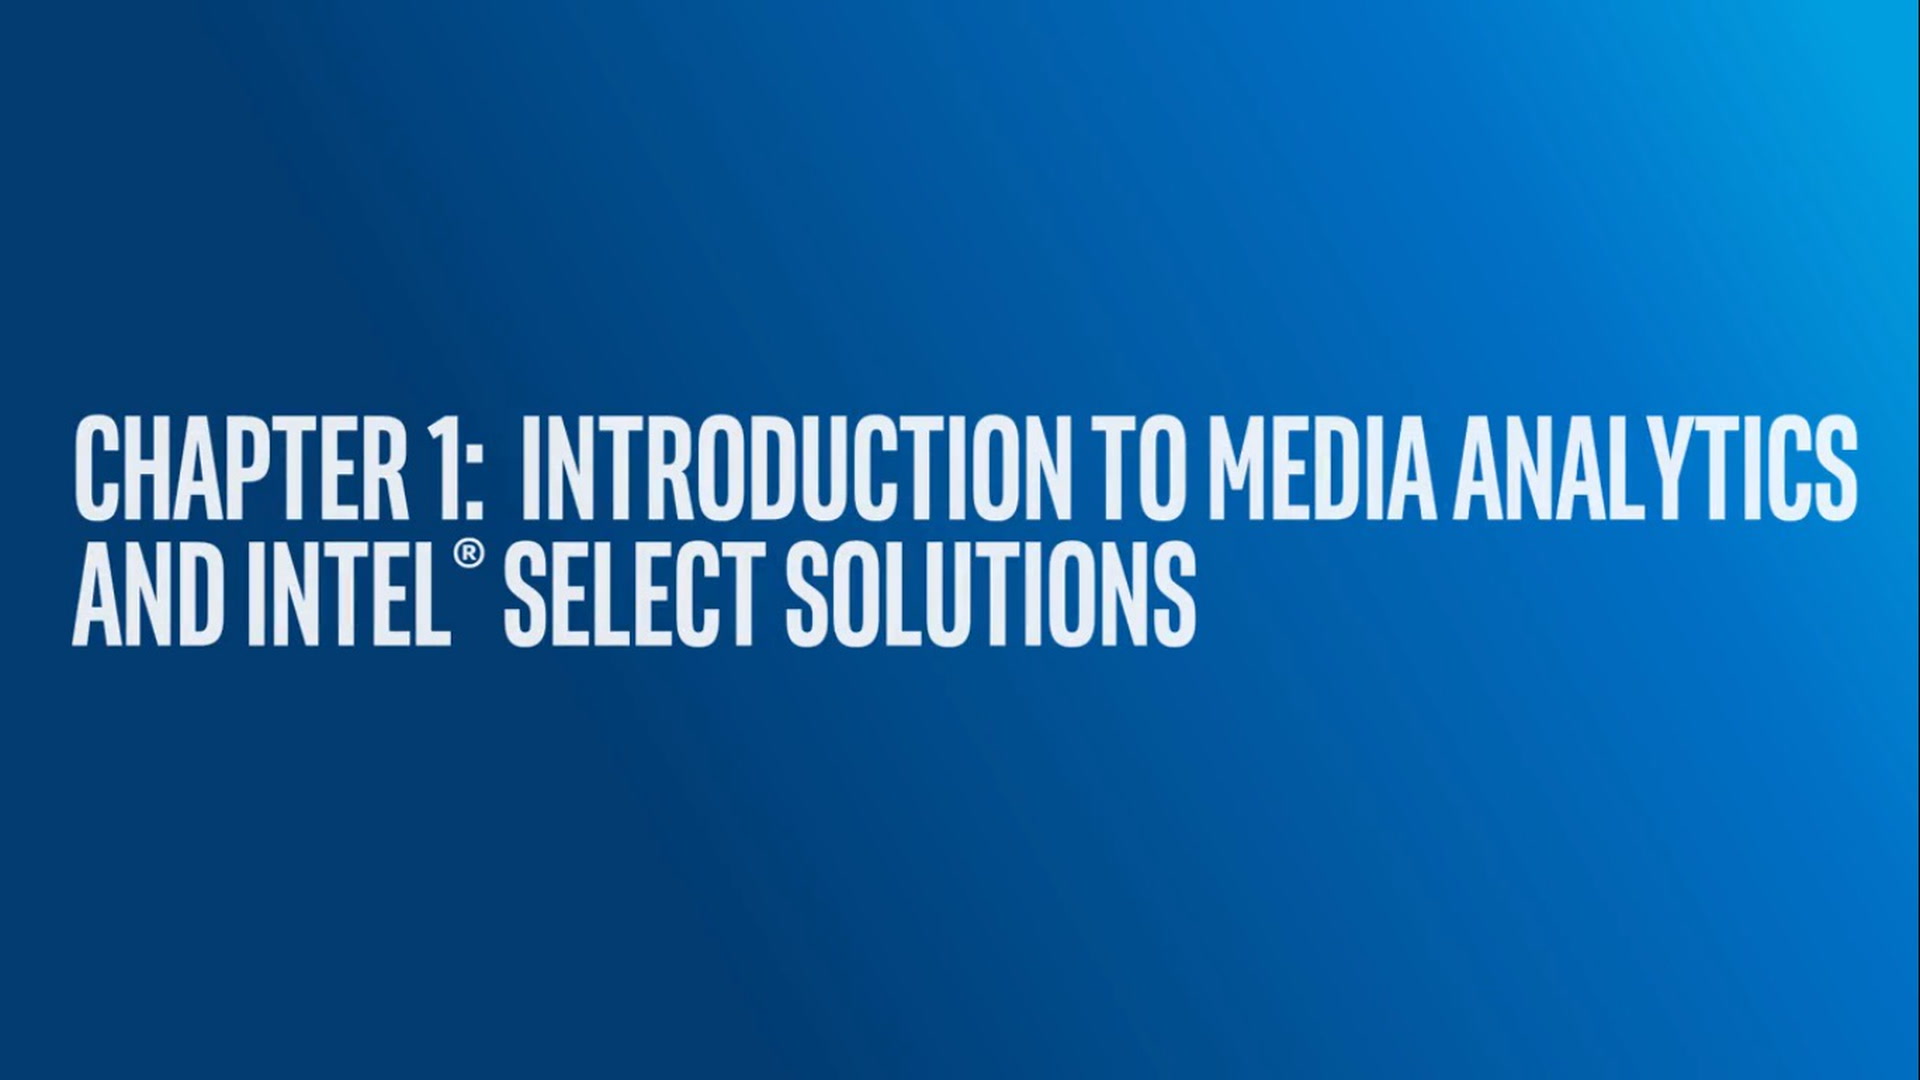 Chapter 1: Introduction to Media Analytics in Visual Cloud